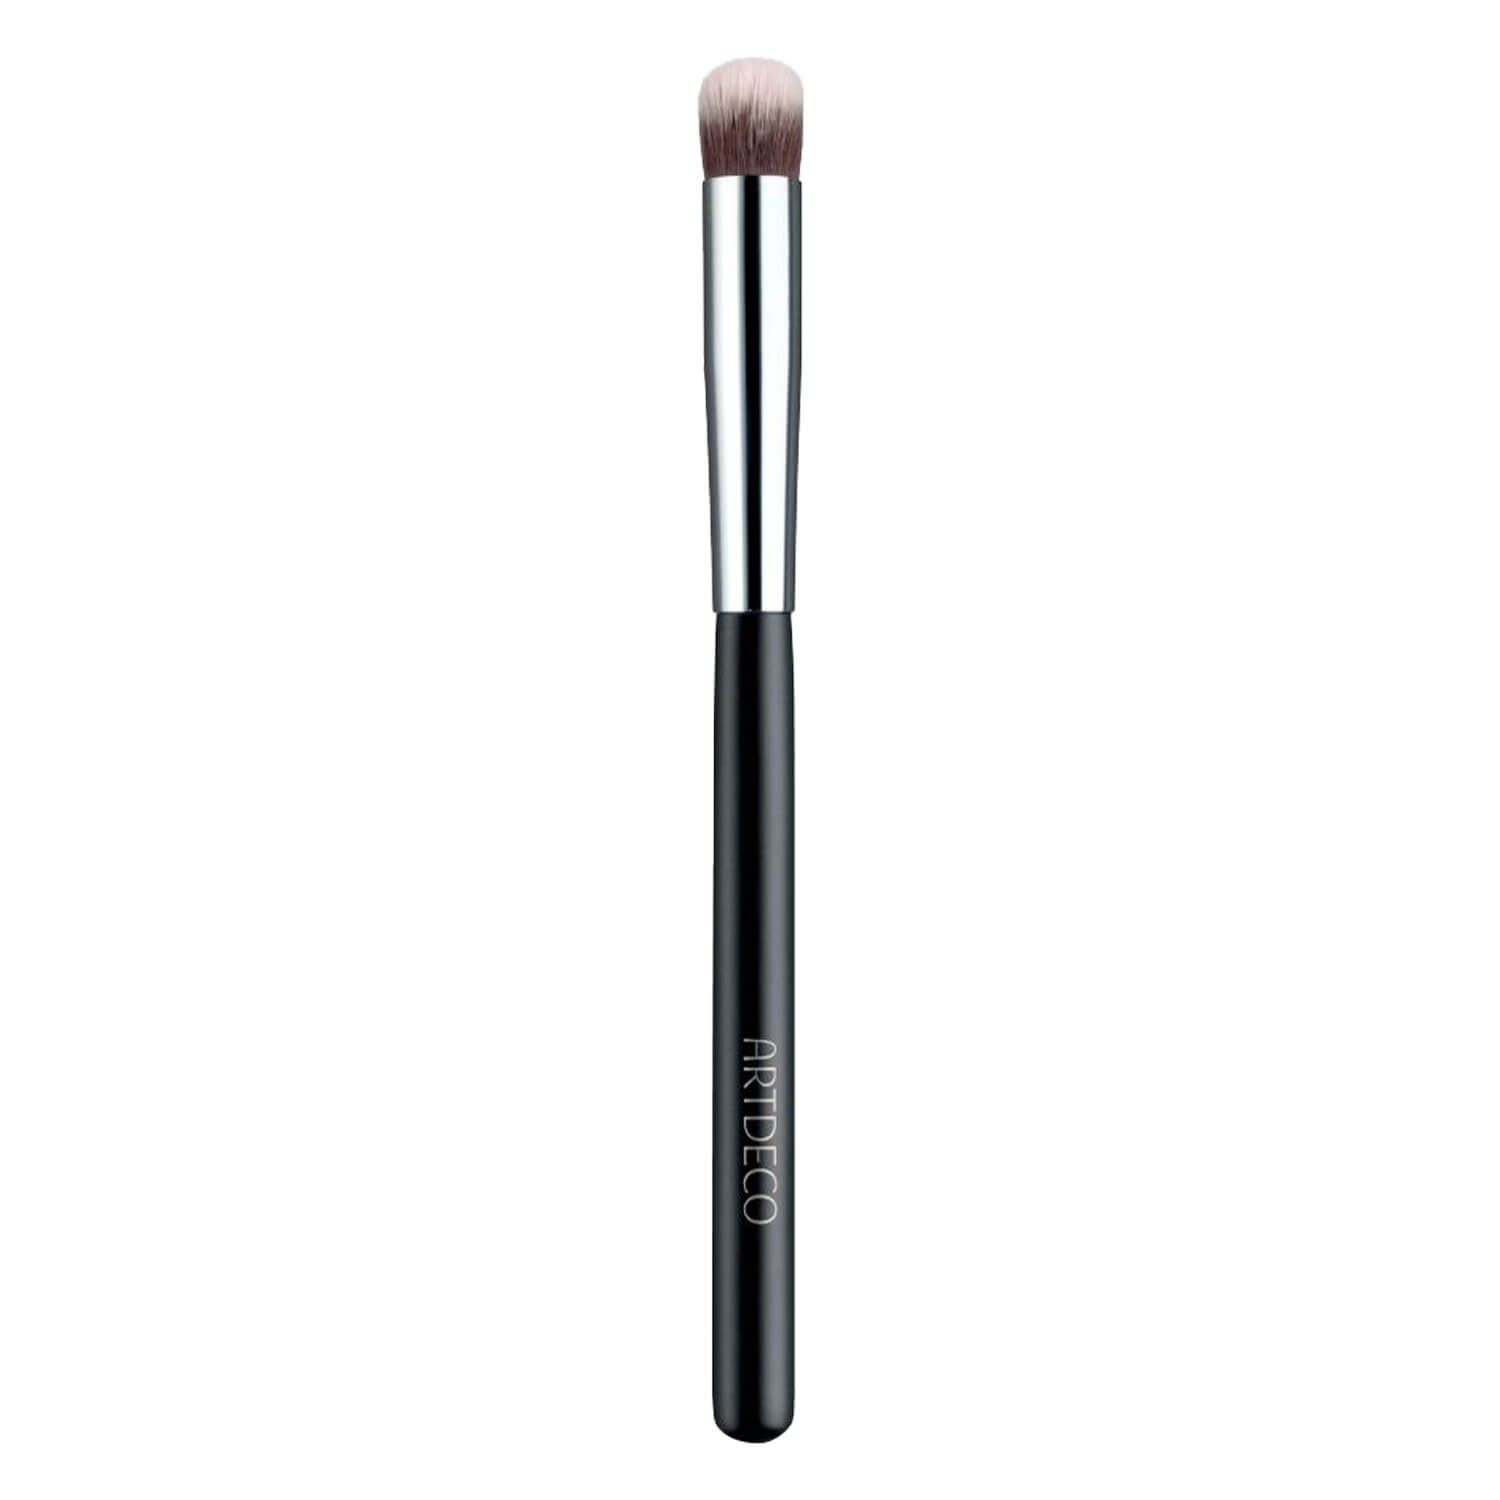 Product image from Artdeco Tools - Concealer & Camouflage Brush